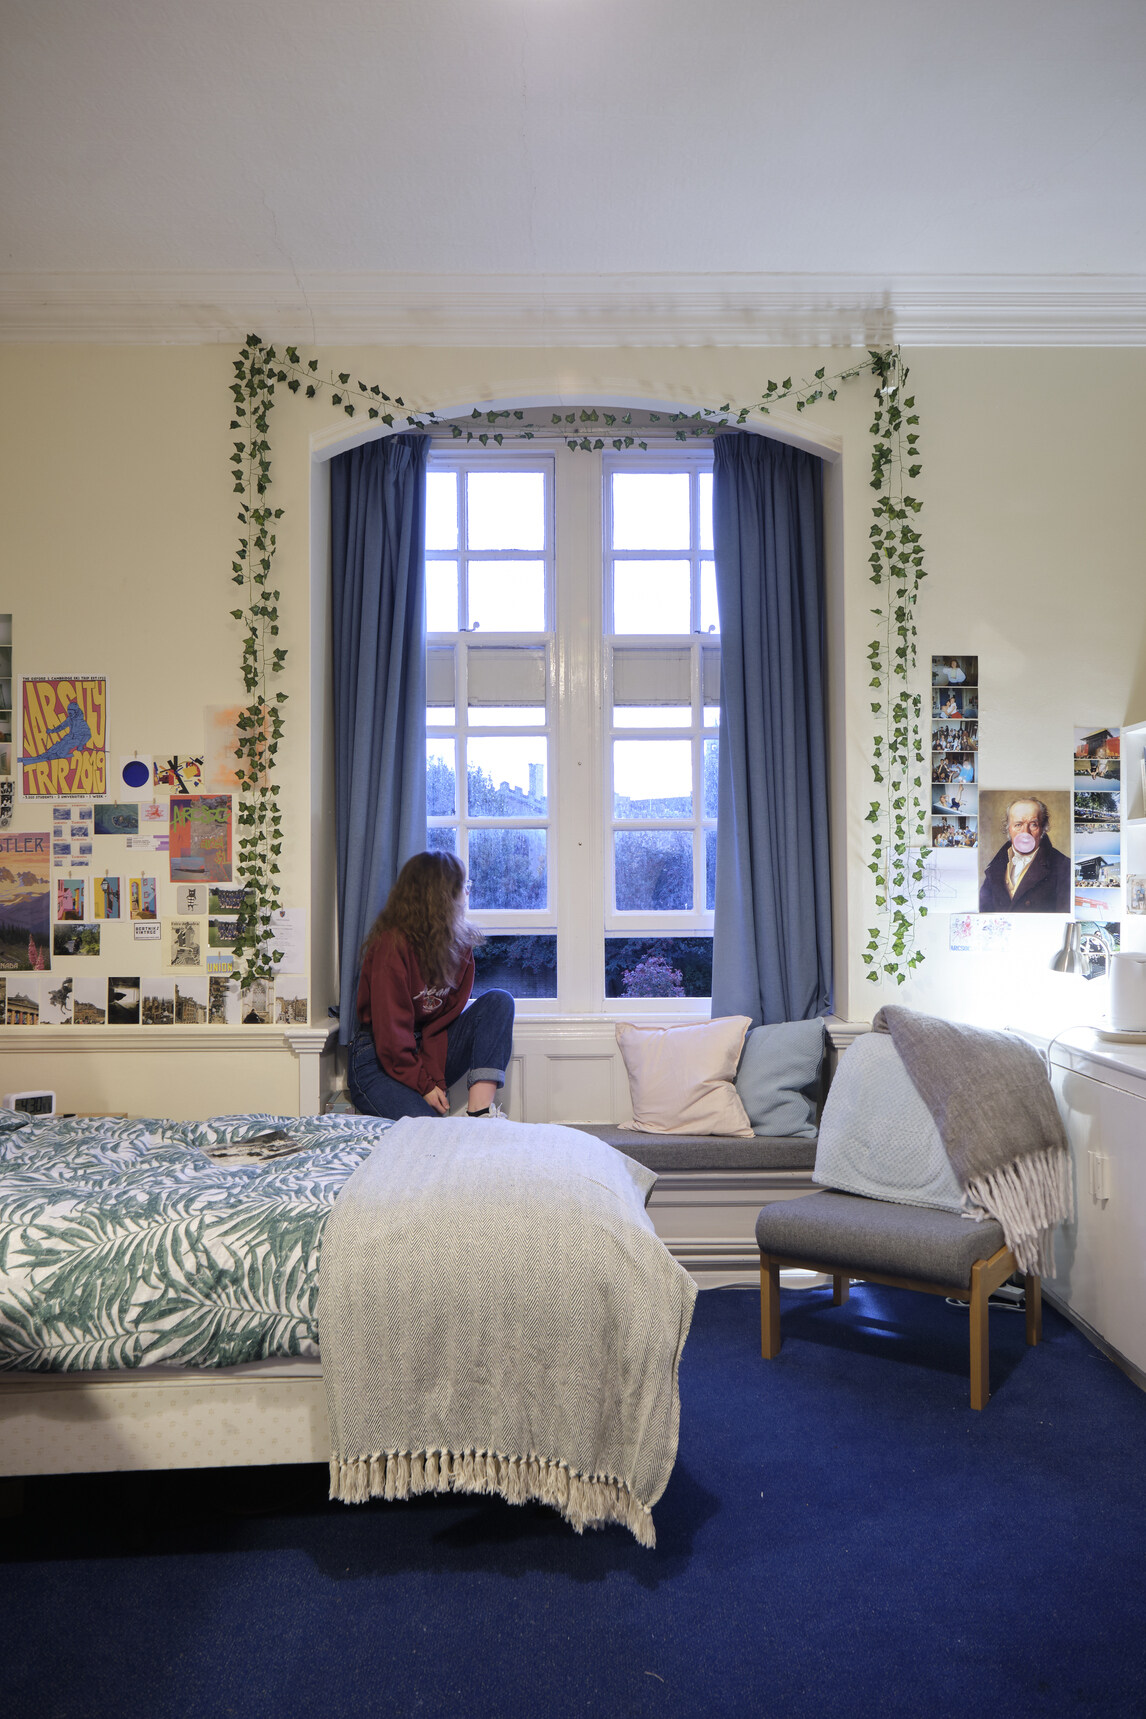 T3a Room with female student looking out of bay window